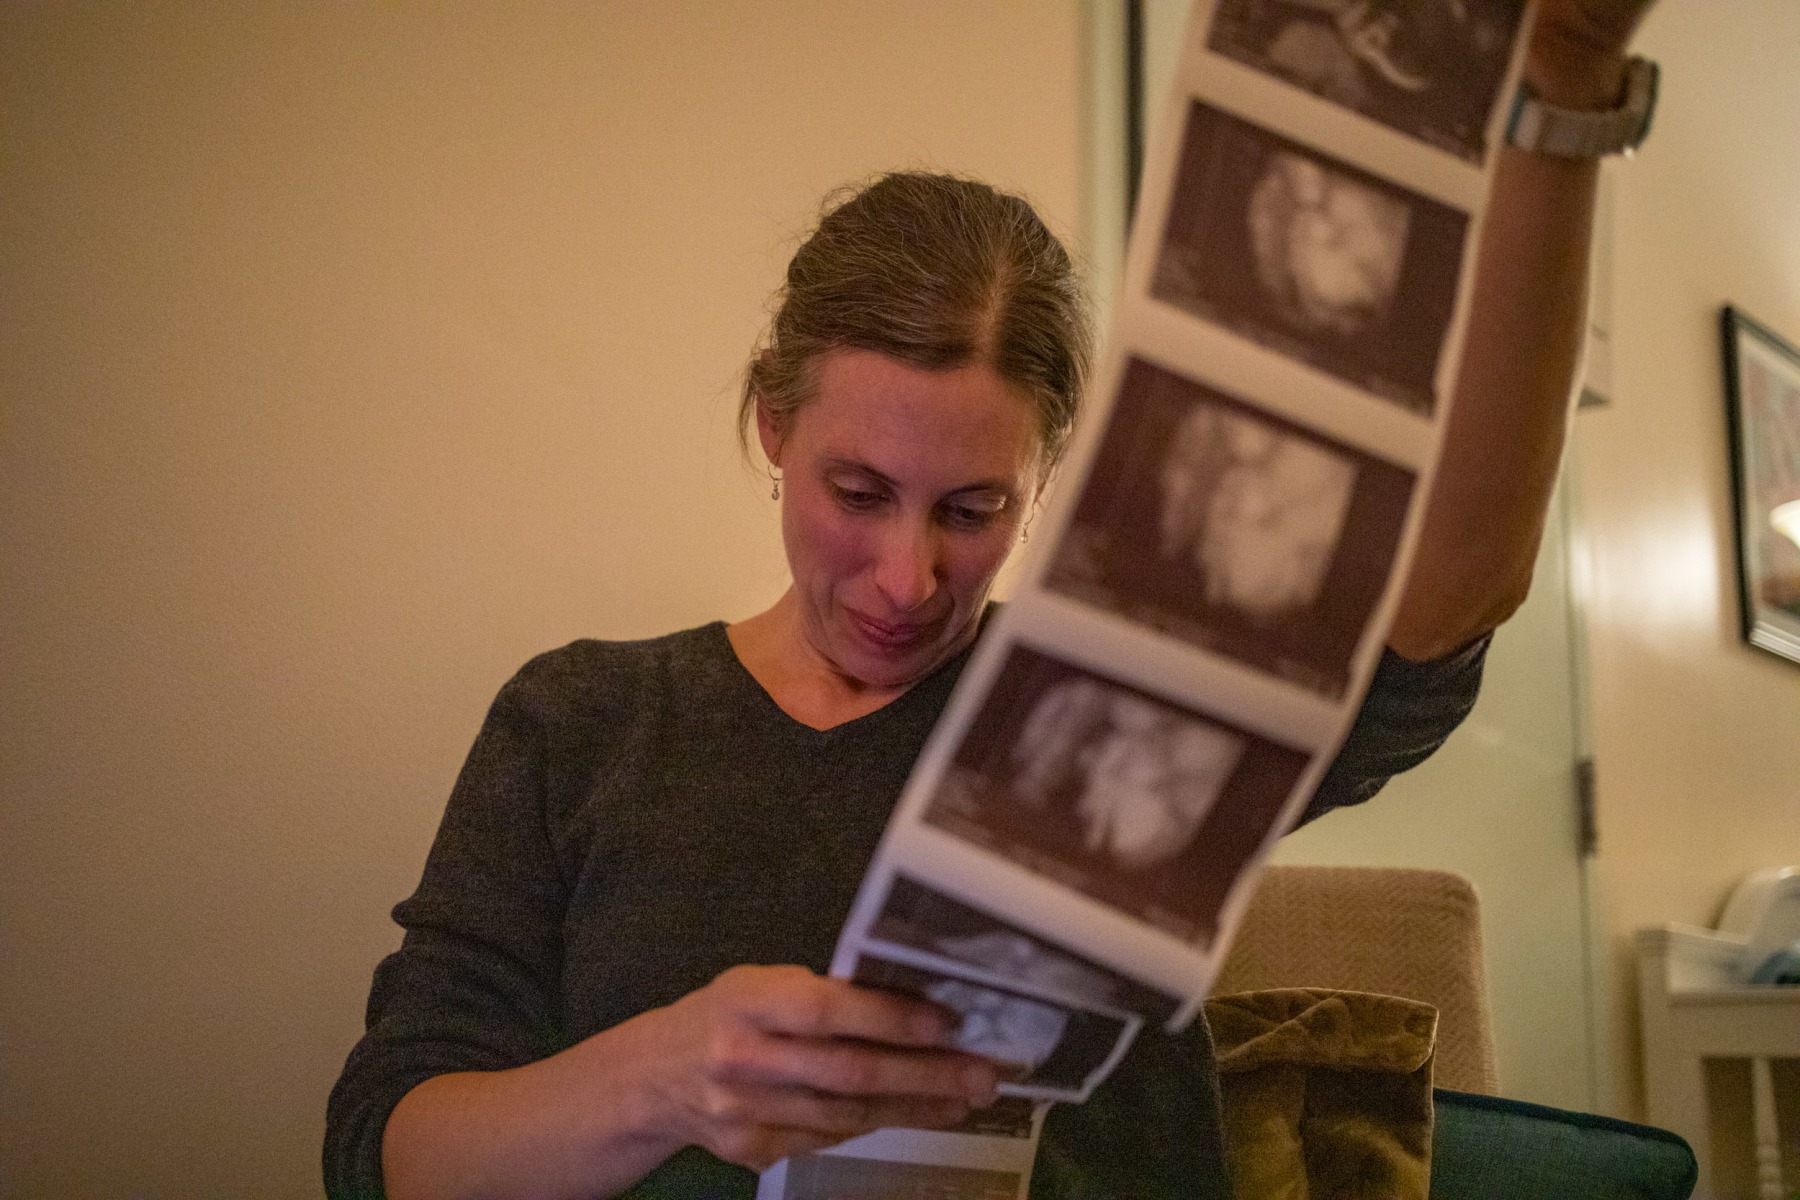 Lauren Genter looks over ultrasound pictures from her patient Kayla McGloin-Smith, of New Straitsville, Ohio, at her practice, Ohio Hills Midwifery, in Athens, Ohio, on Wednesday, November 13, 2019. Genter refers patients to the local hospital for ultrasounds and some testing because she is not a licensed nurse or medical professional. In Ohio, there are no regulations for non-nurse midwives.